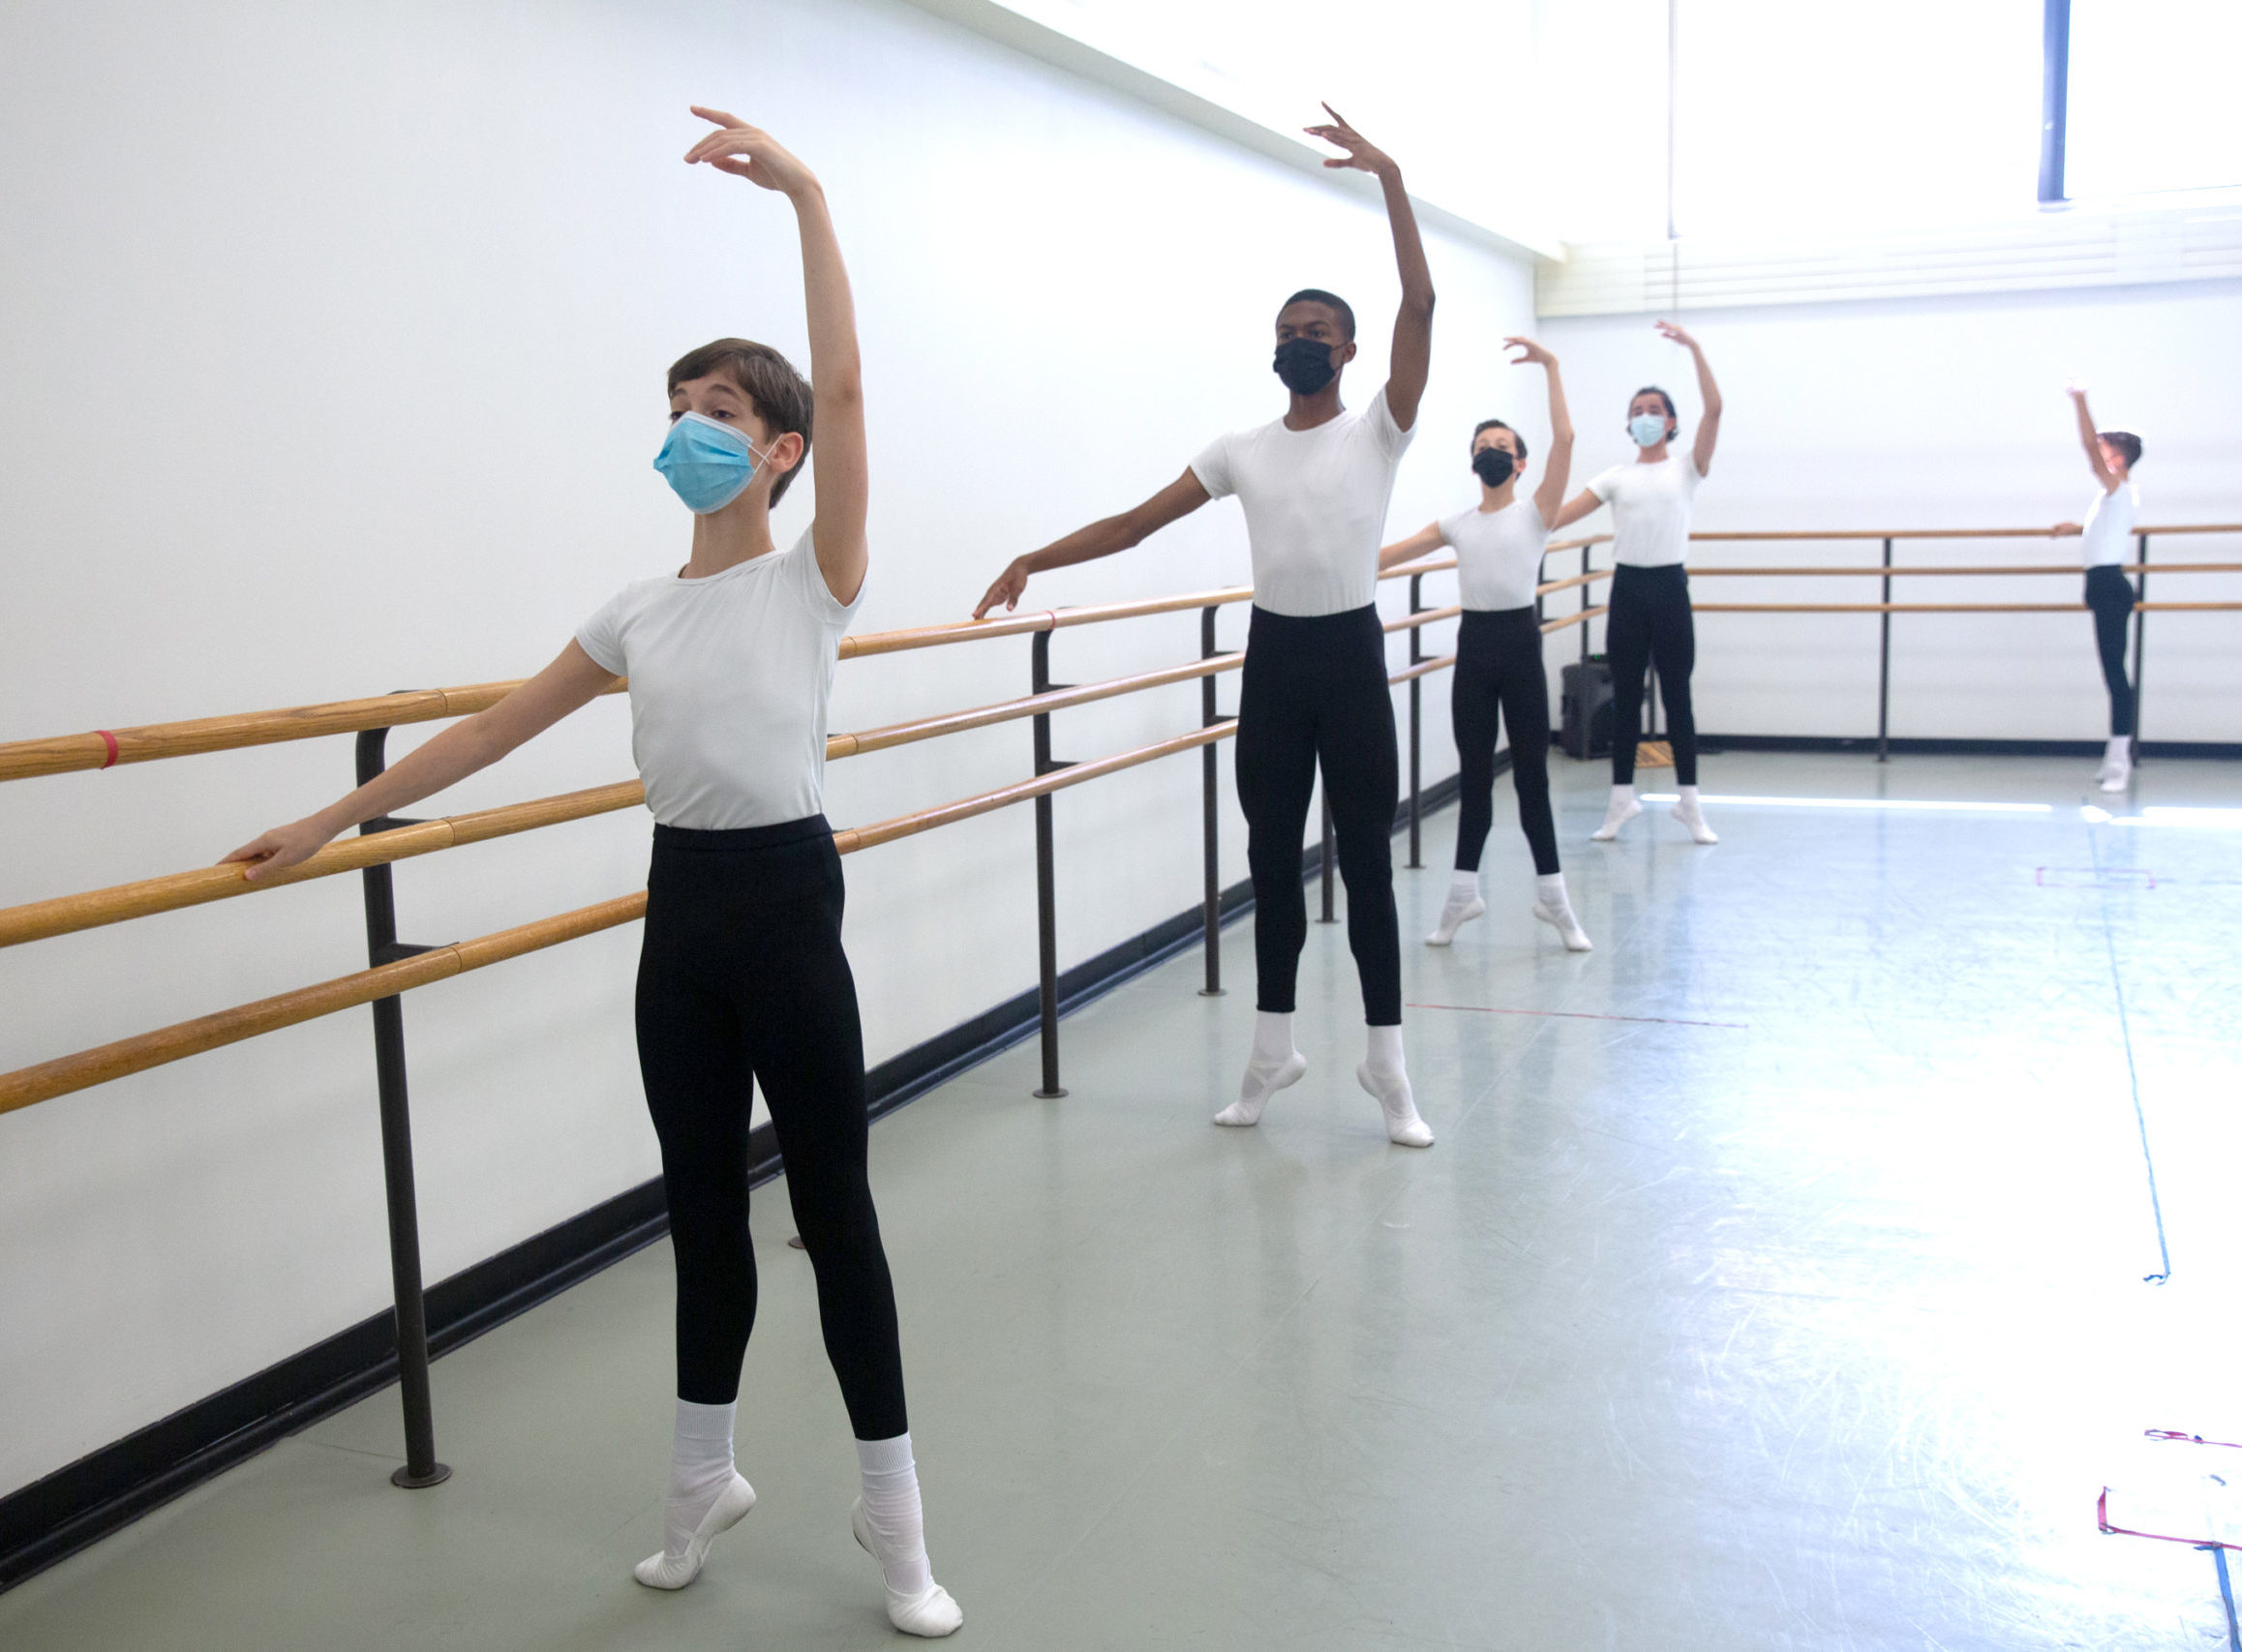 boys in releve first position at the barre - 2021 Summer Course